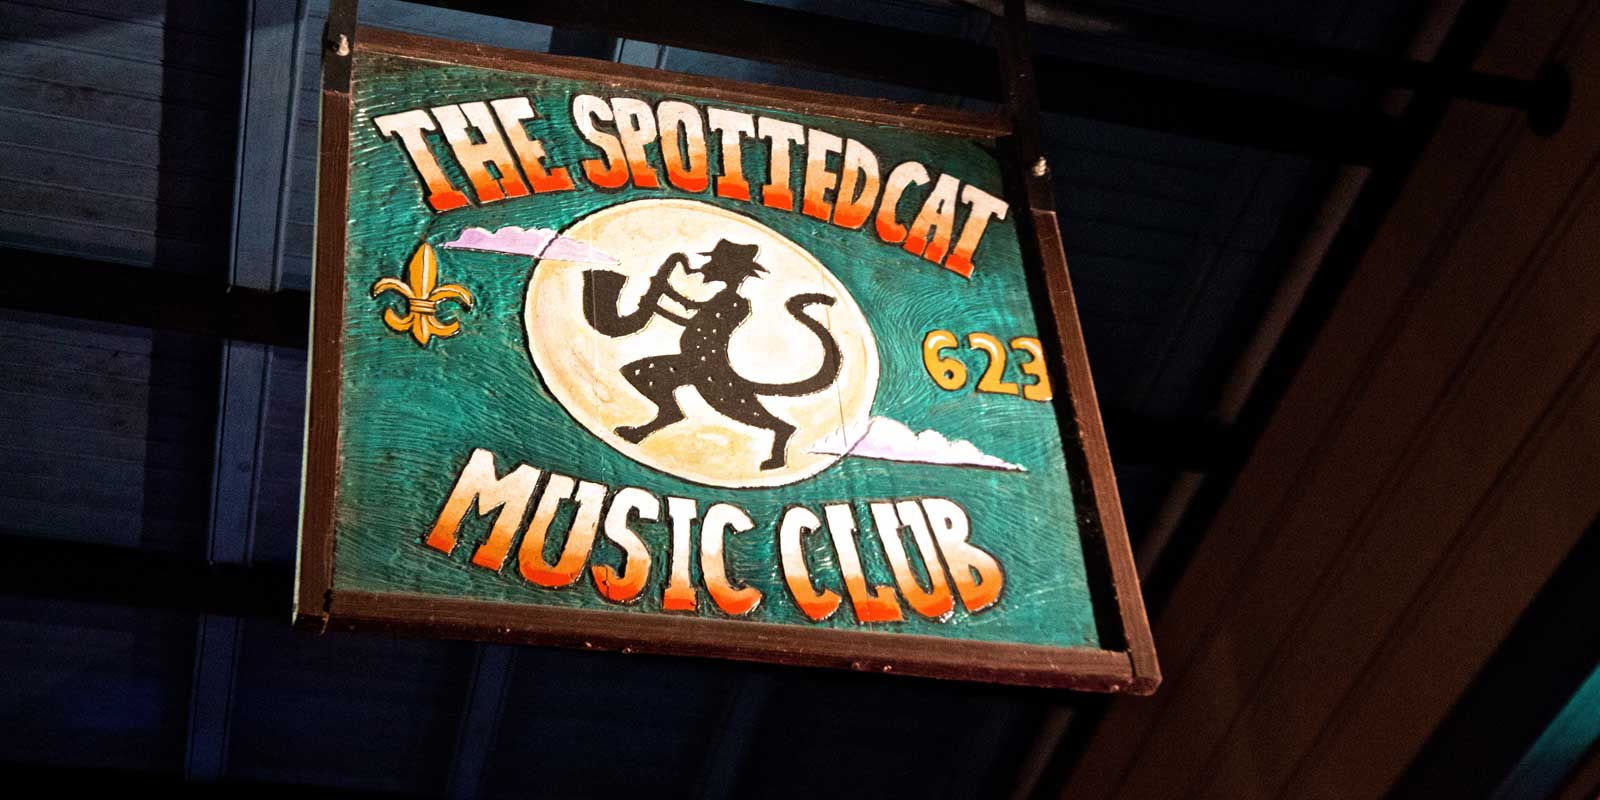 Photo of the sign for The Spotted Cat Music Club in New Orleans, Louisiana